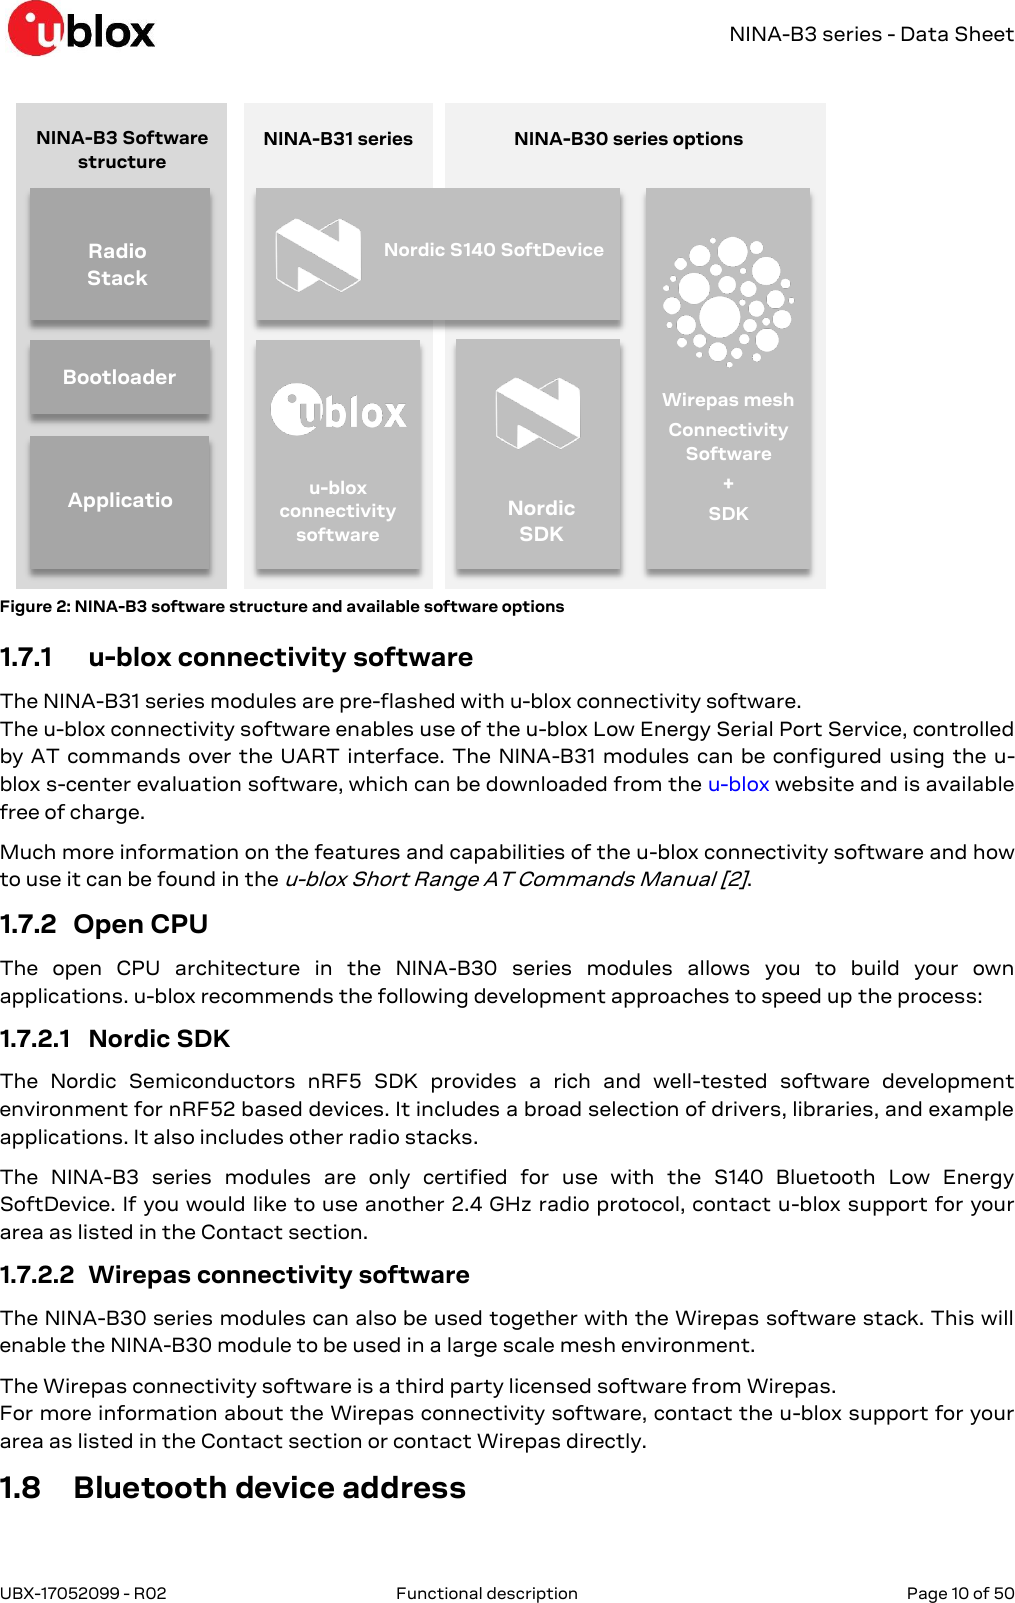   NINA-B3 series - Data Sheet UBX-17052099 - R02  Functional description   Page 10 of 50        1.7.1 u-blox connectivity software The NINA-B31 series modules are pre-flashed with u-blox connectivity software.  The u-blox connectivity software enables use of the u-blox Low Energy Serial Port Service, controlled by AT commands over the UART interface. The NINA-B31 modules can be configured using the u-blox s-center evaluation software, which can be downloaded from the u-blox website and is available free of charge. Much more information on the features and capabilities of the u-blox connectivity software and how to use it can be found in the u-blox Short Range AT Commands Manual [2].  1.7.2 Open CPU The  open  CPU  architecture  in  the  NINA-B30  series  modules  allows  you  to  build  your  own applications. u-blox recommends the following development approaches to speed up the process: 1.7.2.1 Nordic SDK The  Nordic  Semiconductors  nRF5  SDK  provides  a  rich  and  well-tested  software  development environment for nRF52 based devices. It includes a broad selection of drivers, libraries, and example applications. It also includes other radio stacks.  The  NINA-B3  series  modules  are  only  certified  for  use  with  the  S140  Bluetooth  Low  Energy SoftDevice. If you would like to use another 2.4 GHz radio protocol, contact u-blox support for your area as listed in the Contact section. 1.7.2.2 Wirepas connectivity software The NINA-B30 series modules can also be used together with the Wirepas software stack. This will enable the NINA-B30 module to be used in a large scale mesh environment.  The Wirepas connectivity software is a third party licensed software from Wirepas.  For more information about the Wirepas connectivity software, contact the u-blox support for your area as listed in the Contact section or contact Wirepas directly.  1.8 Bluetooth device address Figure 2: NINA-B3 software structure and available software options NINA-B3 Software structure   Bootloader    Radio Stack Application NINA-B31 series NINA-B30 series options Nordic S140 SoftDevice u-blox connectivity software Nordic SDK  Wirepas mesh Connectivity Software + SDK 